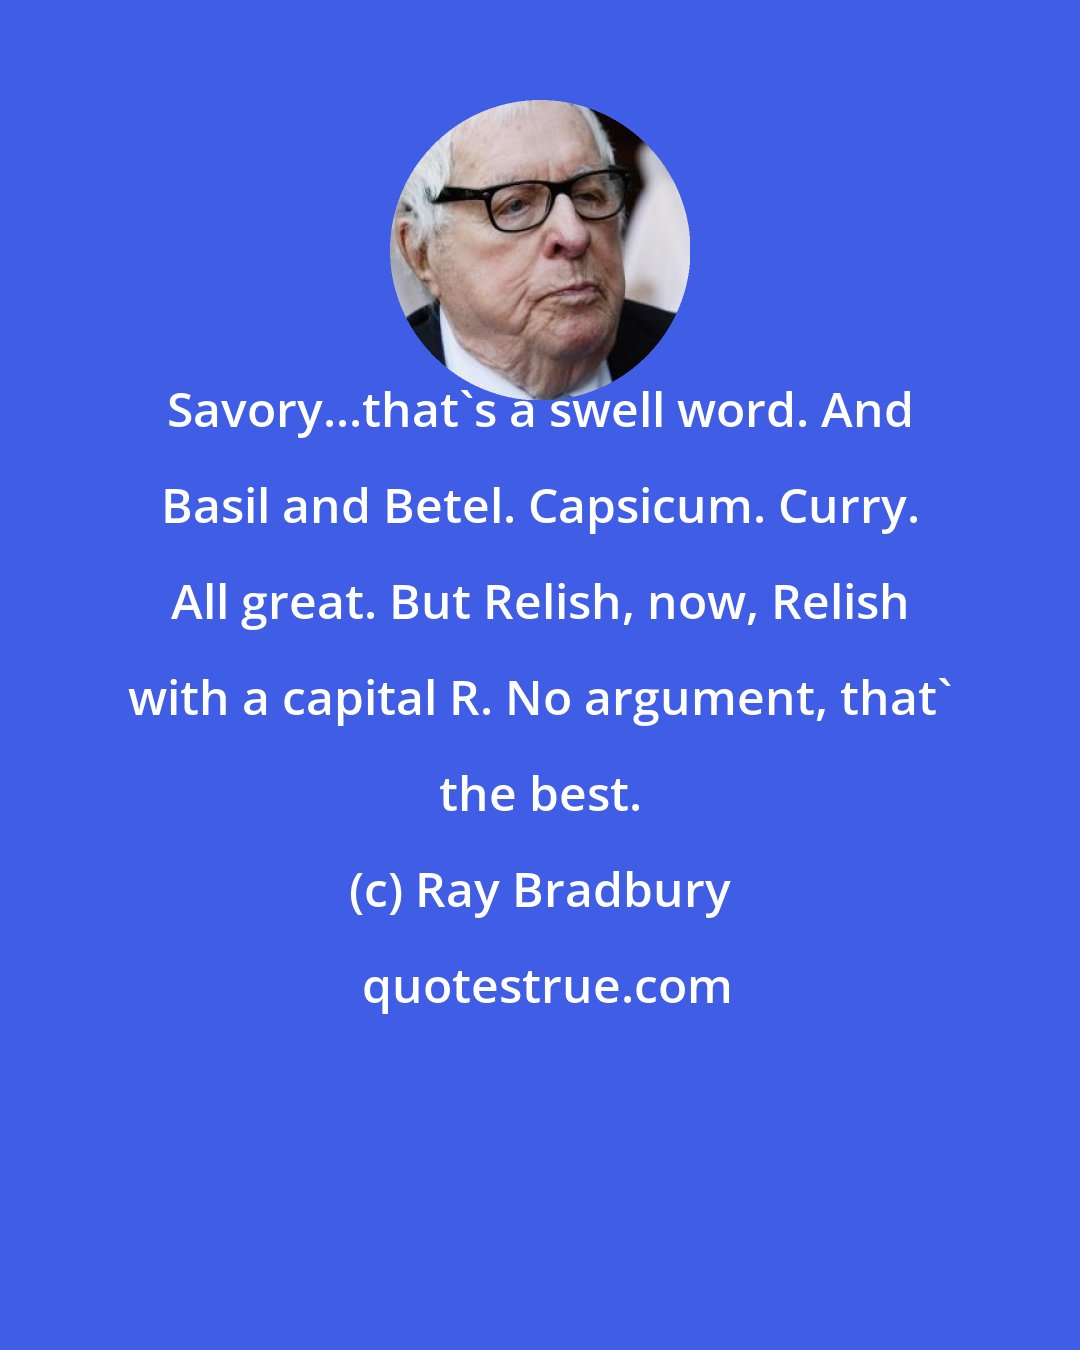 Ray Bradbury: Savory...that's a swell word. And Basil and Betel. Capsicum. Curry. All great. But Relish, now, Relish with a capital R. No argument, that' the best.